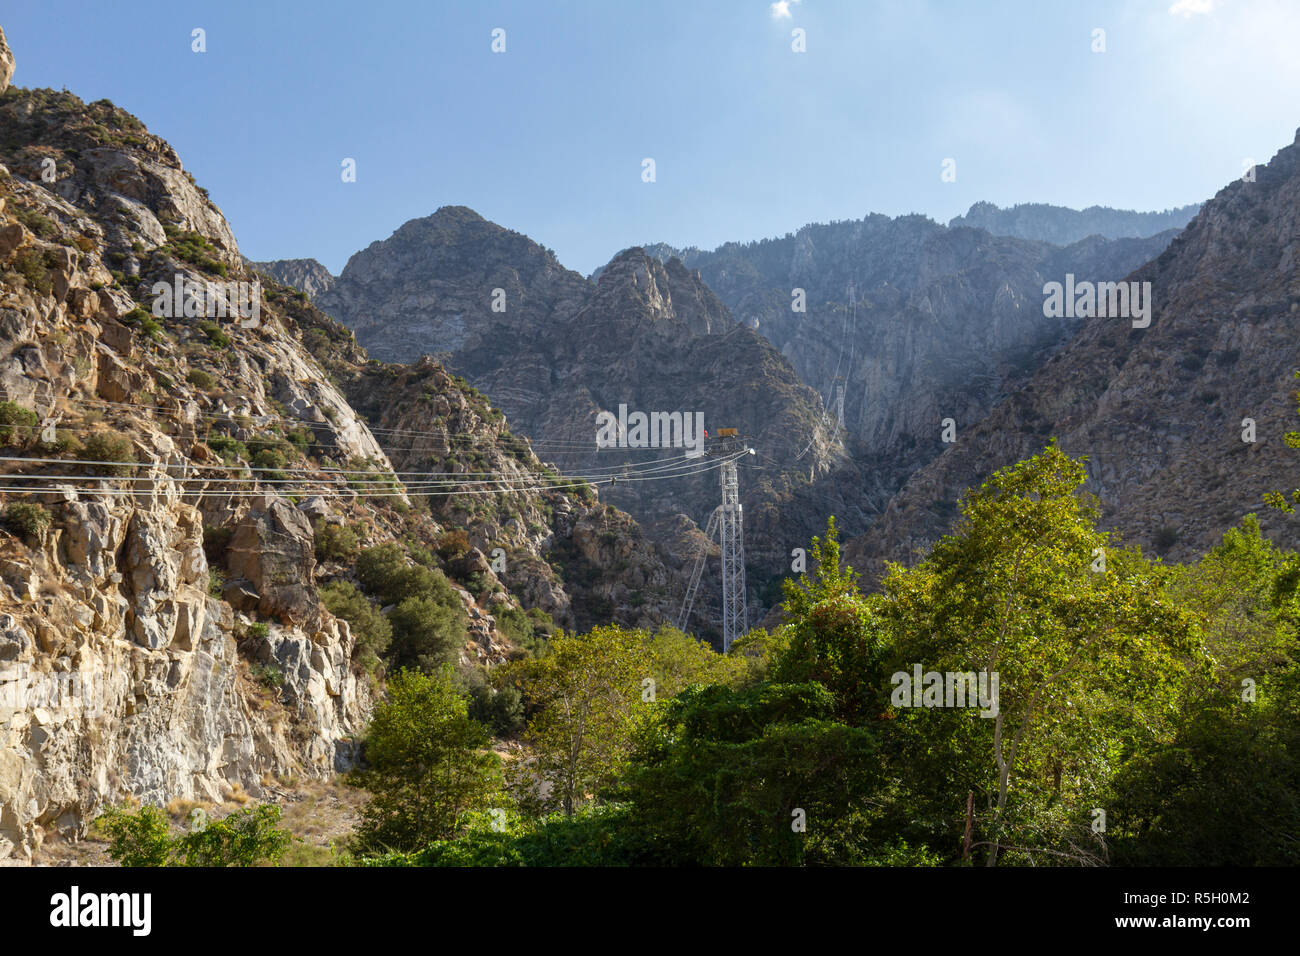 View up Chino Canyon, Mt. San Jacinto State Park and the Palm Springs Aerial Tramway, Palm Springs, California, United States. Stock Photo